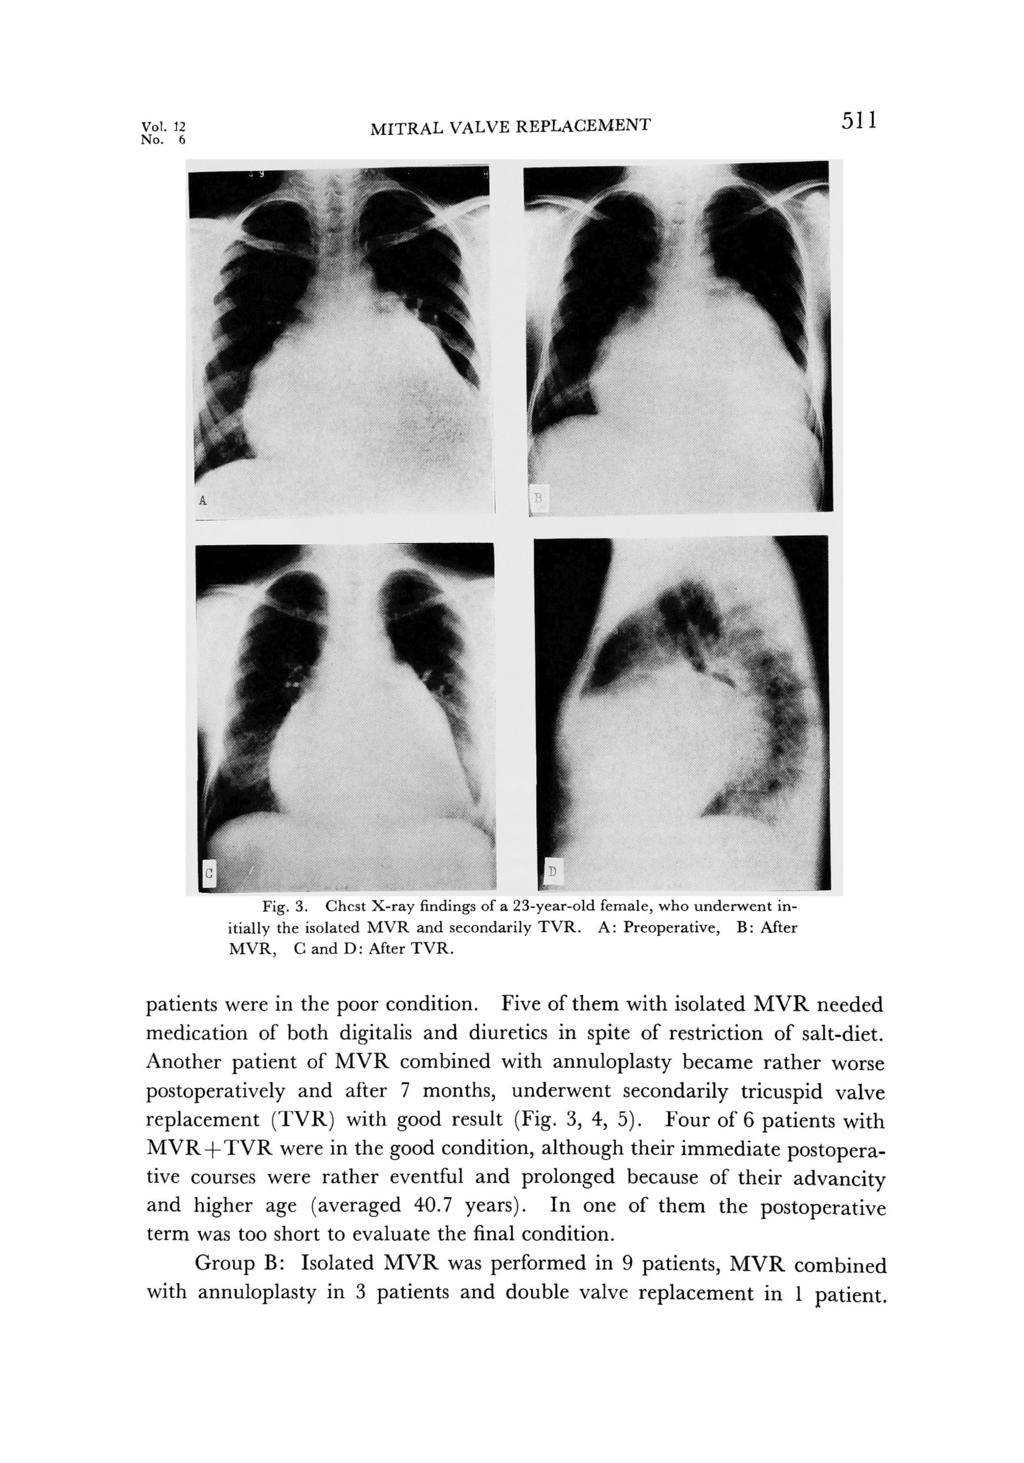 Vol.12 No.6 MITRAL VALVE REPLACEMENT 511 Fig.3. Chest X-ray findings of a 23-year-old female, who underwent initially the isolated MVR and secondarily TVR.